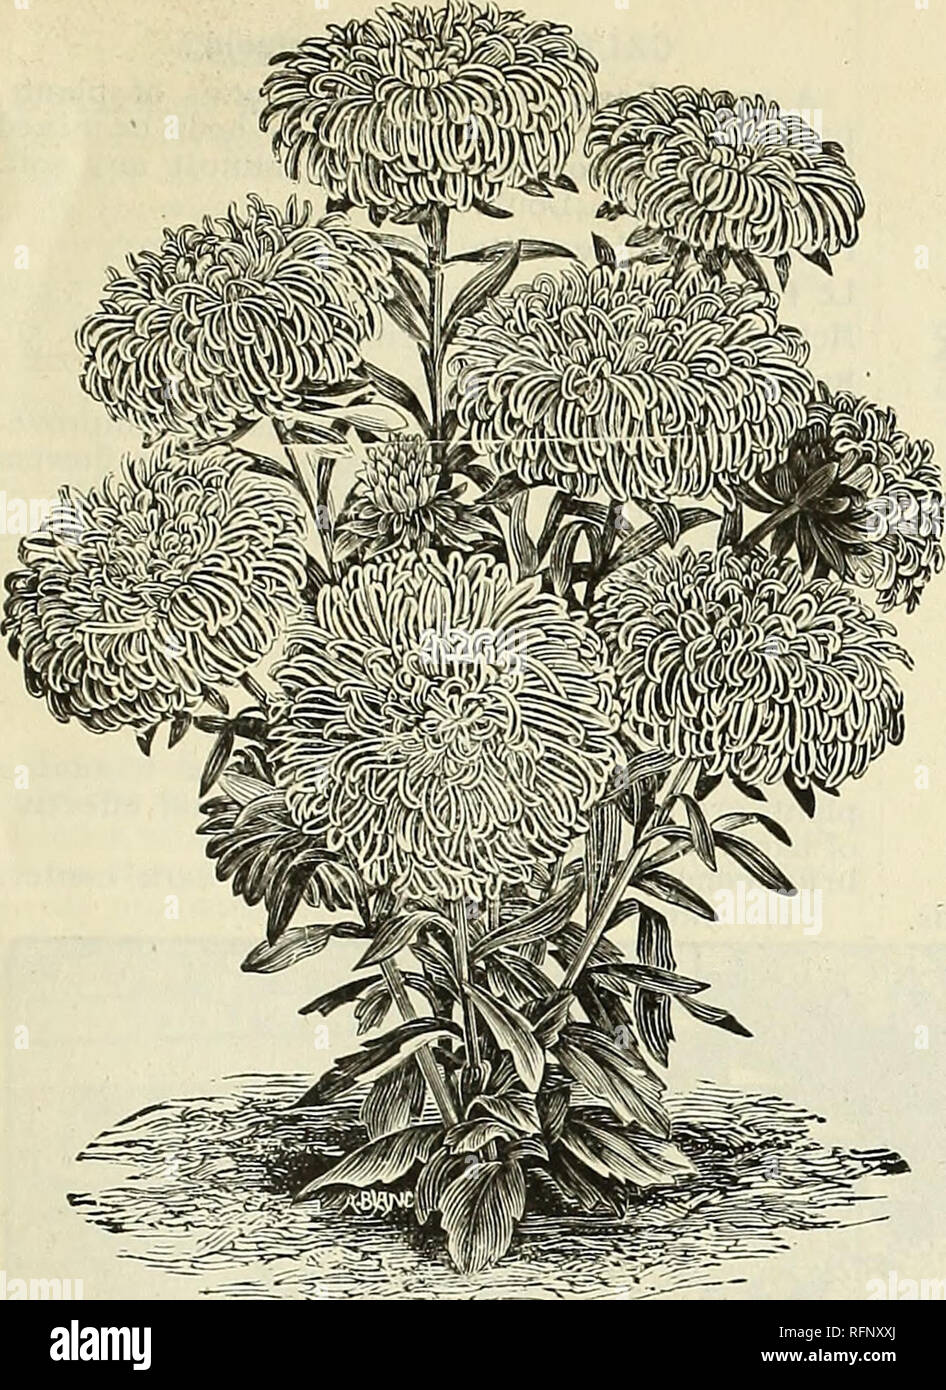 . Annual catalogue of seeds and bulbs. Vegetables Seeds Catalogs; Flowers Seeds Catalogs; Fruit Catalogs; Gardening Equipment and supplies Catalogs; Commercial catalogs New York (State) Buffalo. CATALOGUE OF VEGETABLE, FLOWER AND FARM SEEDS. 3i. BRANCHING ASTER. AUBRIETIA. Quite an ornamental genus of dwarf-growing character, and for that reason is a most appropriate plant for rockwork or for planting in edgings. Culture same as given for auricula. Graeca. Lilac. ]A foot. Hardy perennial. Pkt- 10 cts. Eryi. Dark blue. Pkt. 10 cts. ASTERS. These are among the prettiest annuals in their season,  Stock Photo